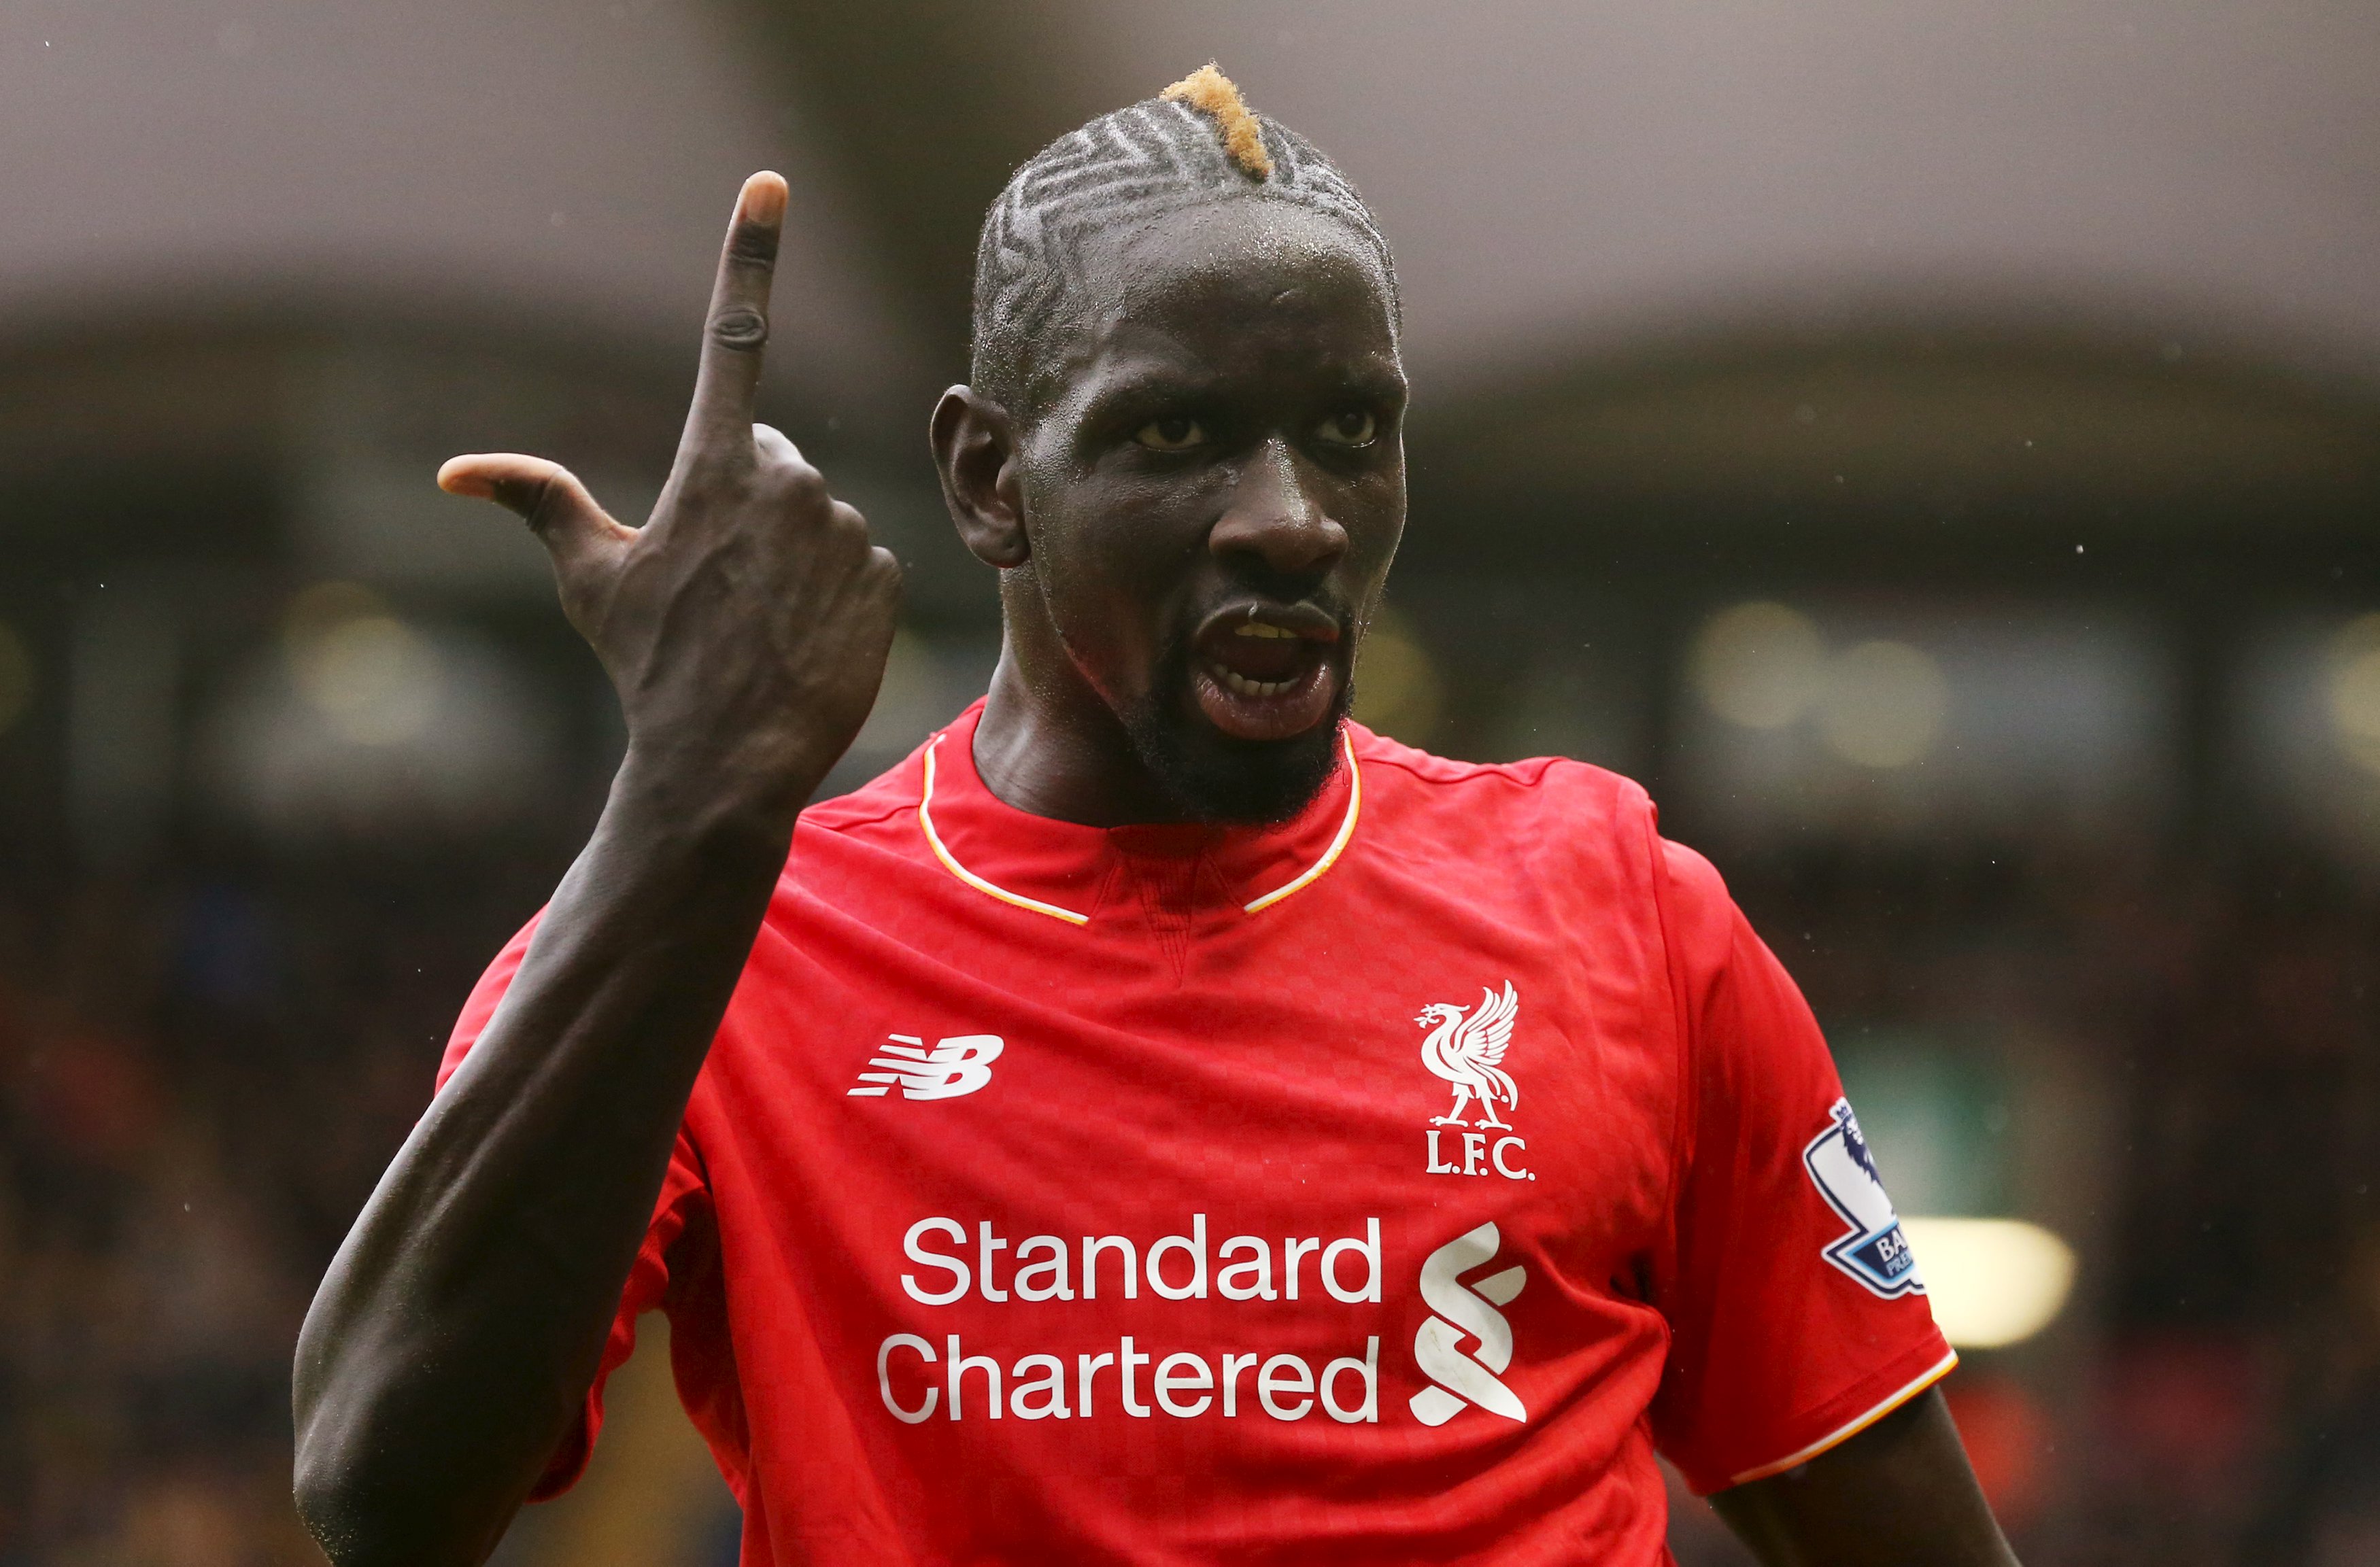 Liverpool drop Sakho after failed dope test